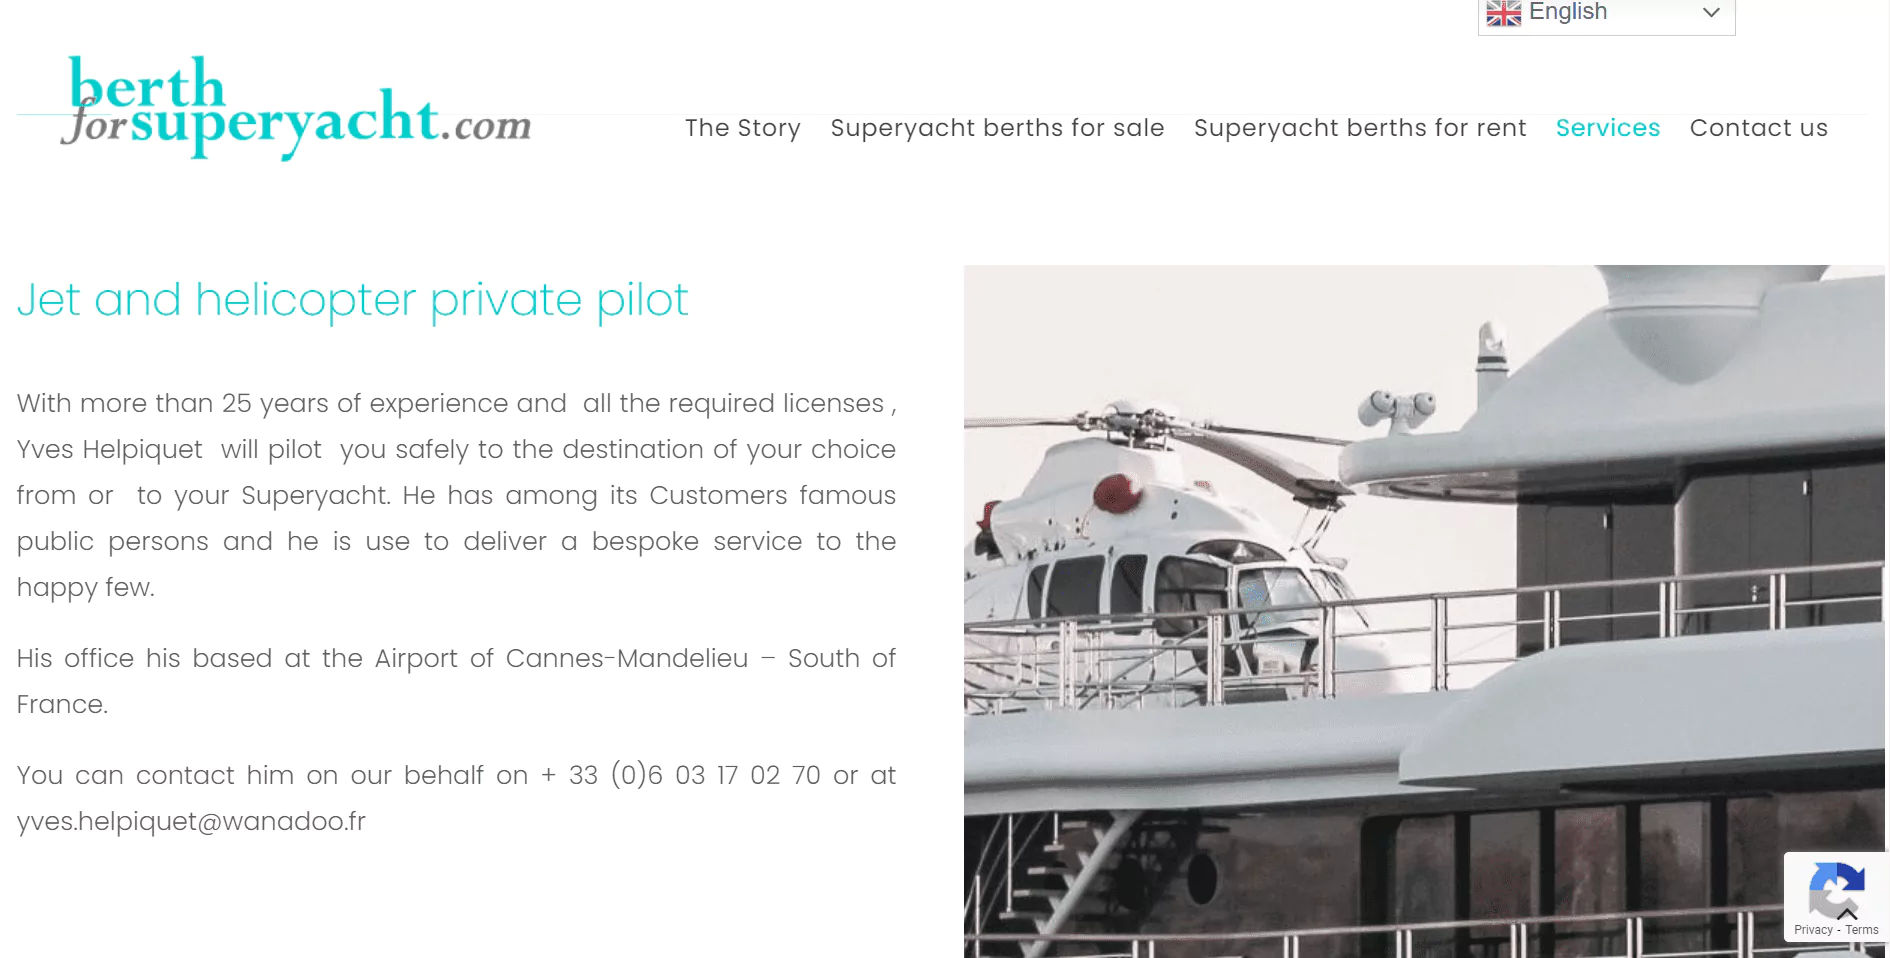 baccana-digital-consulting-wordpress-website-berth-for-superyacht-private-helicopter-service